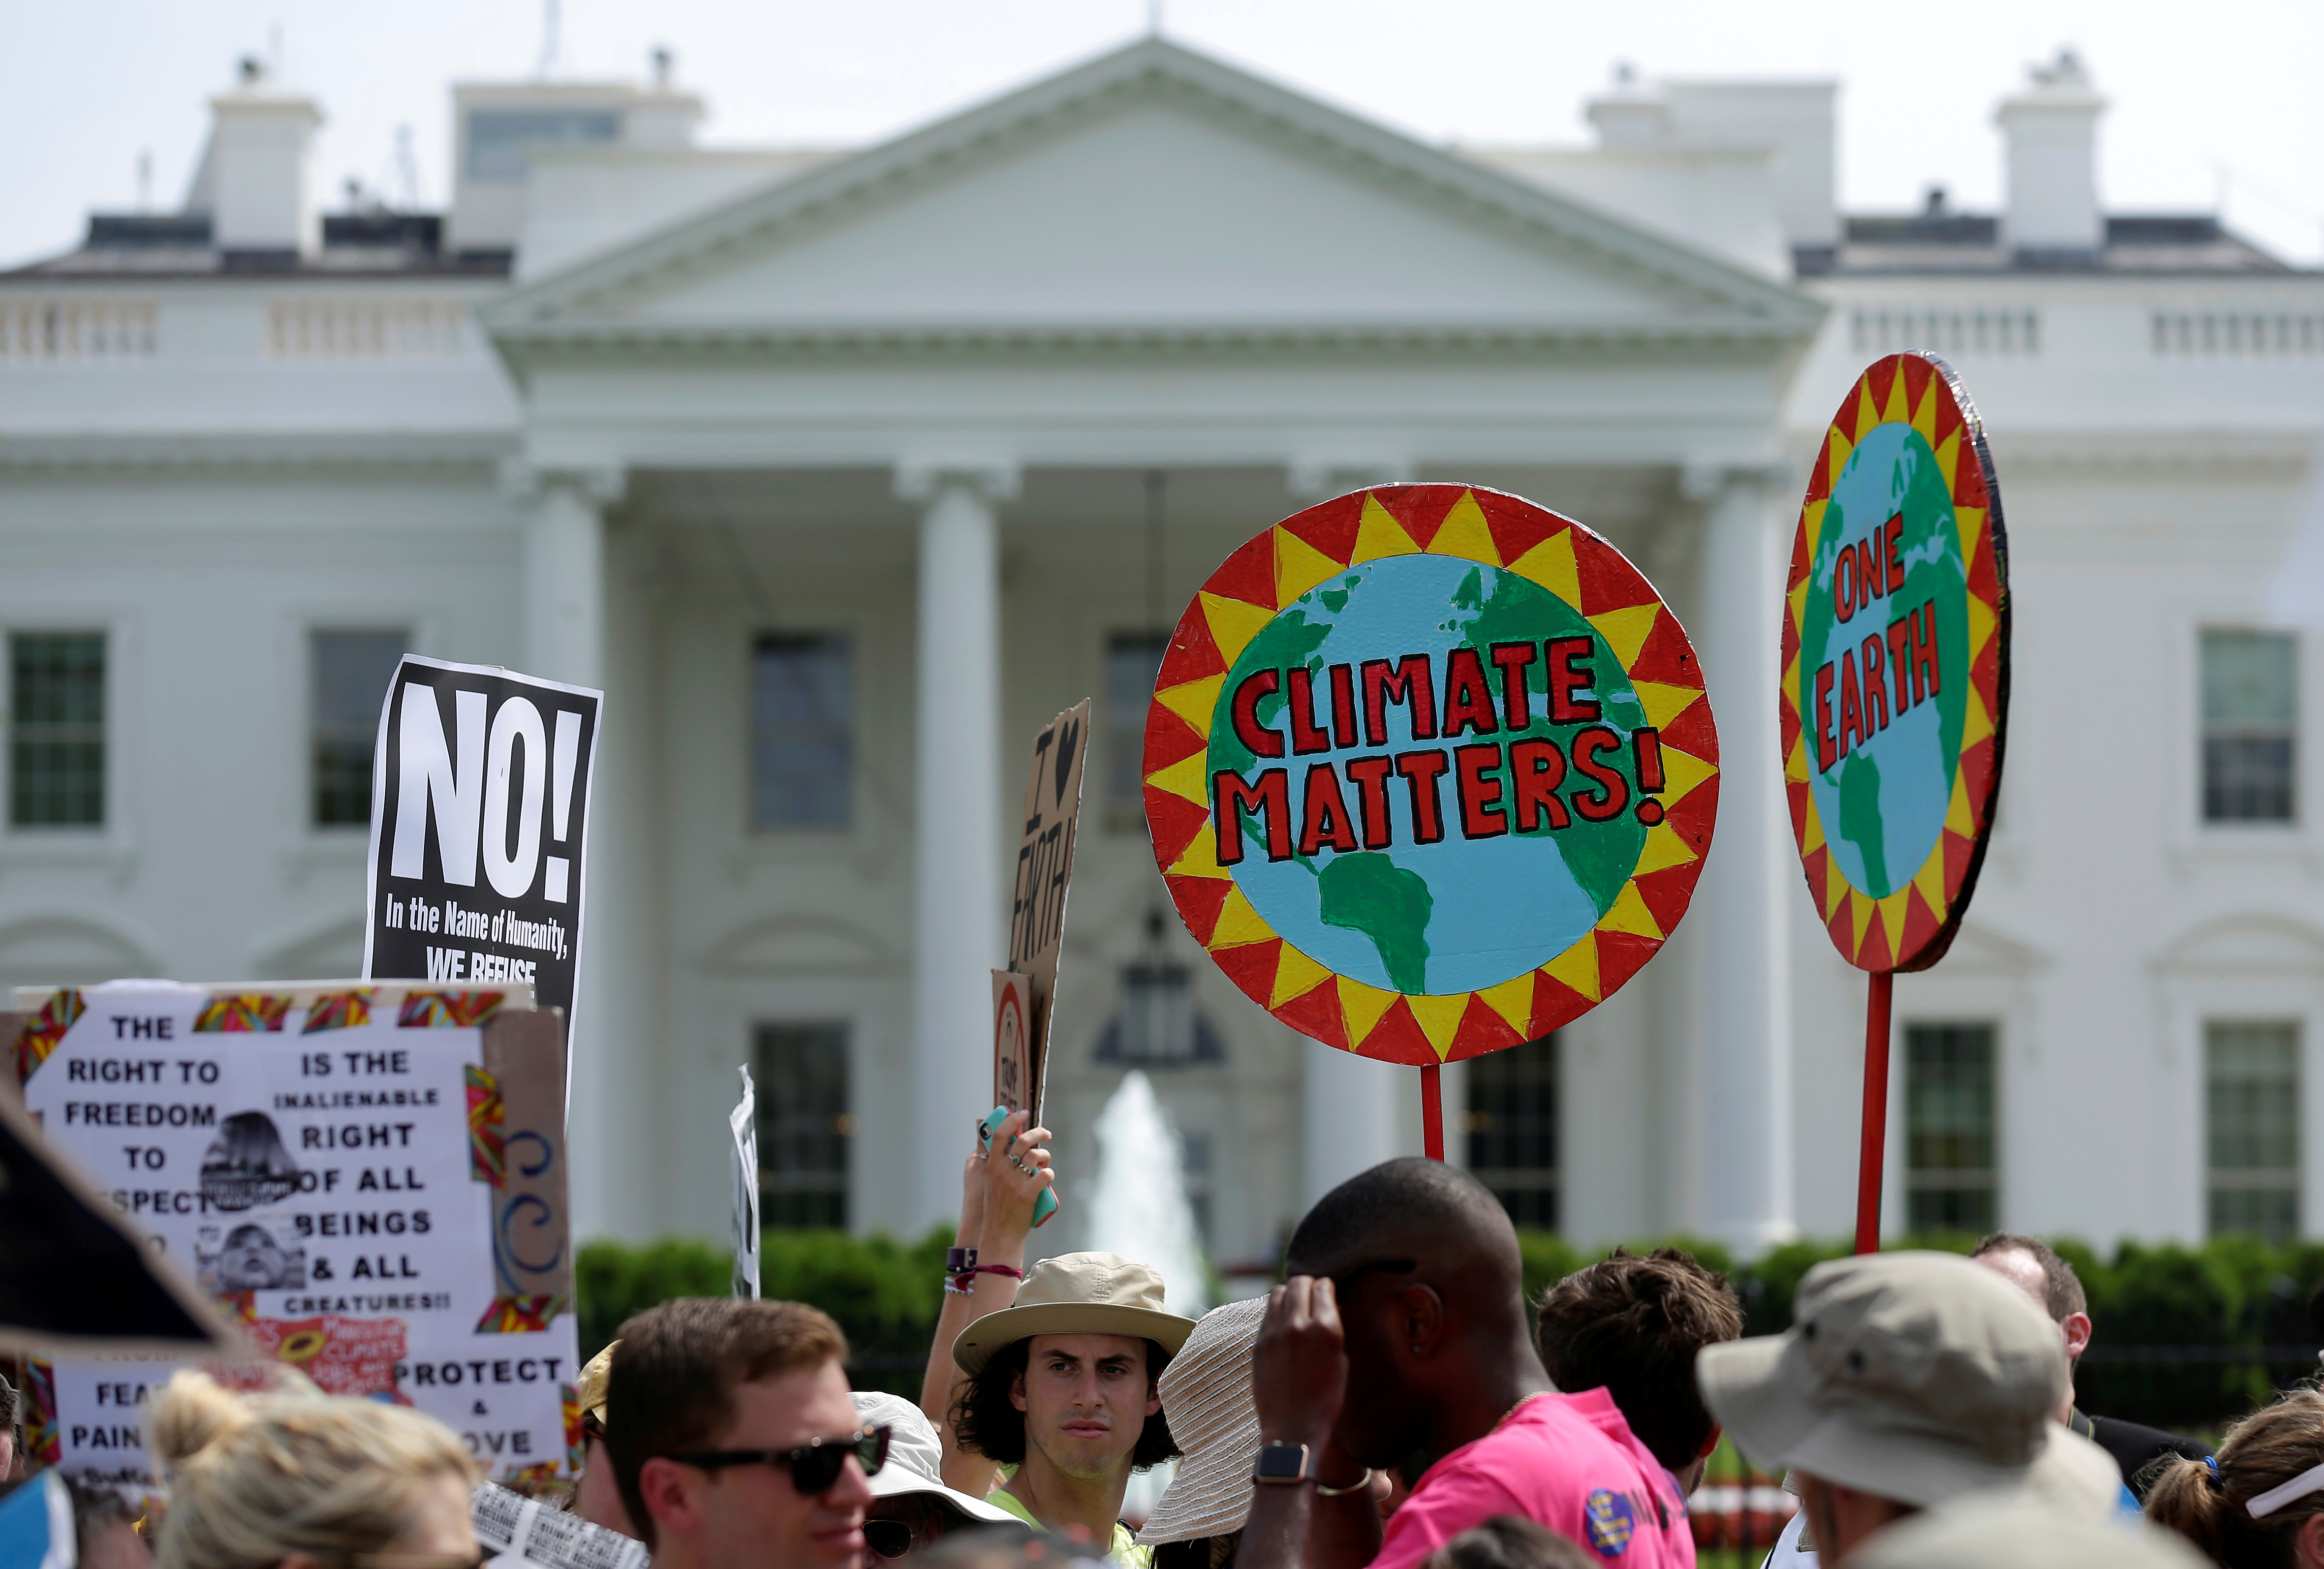 rotesters carry signs during the Peoples Climate March at the White House in Washington